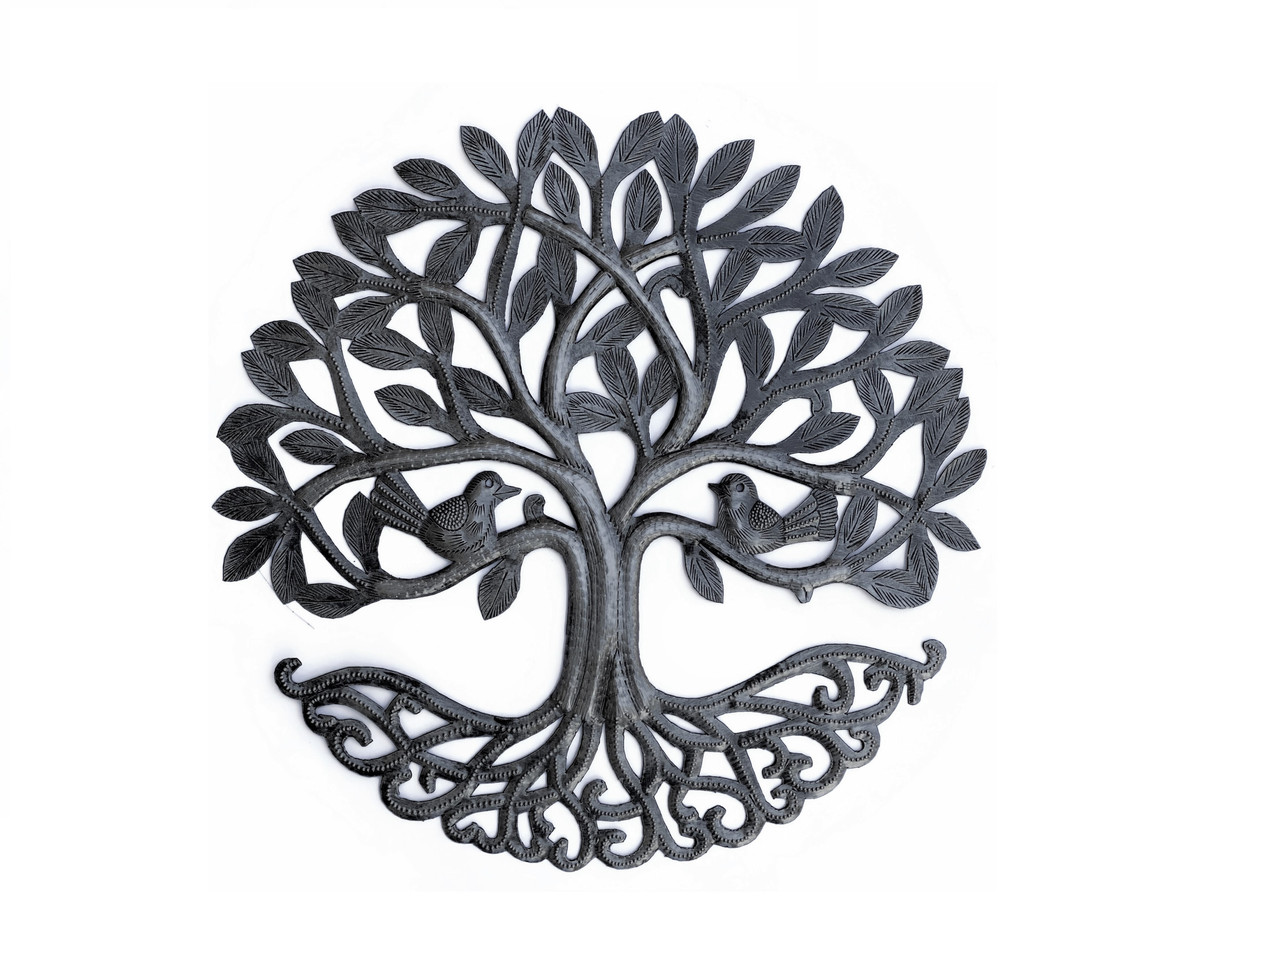 Nature Inspired Metal Tree with Birds, Love Birds, Friendship Garden Wall Hanging Tree, Handmade in Haiti, Recycled Steel, 13 Inches Round